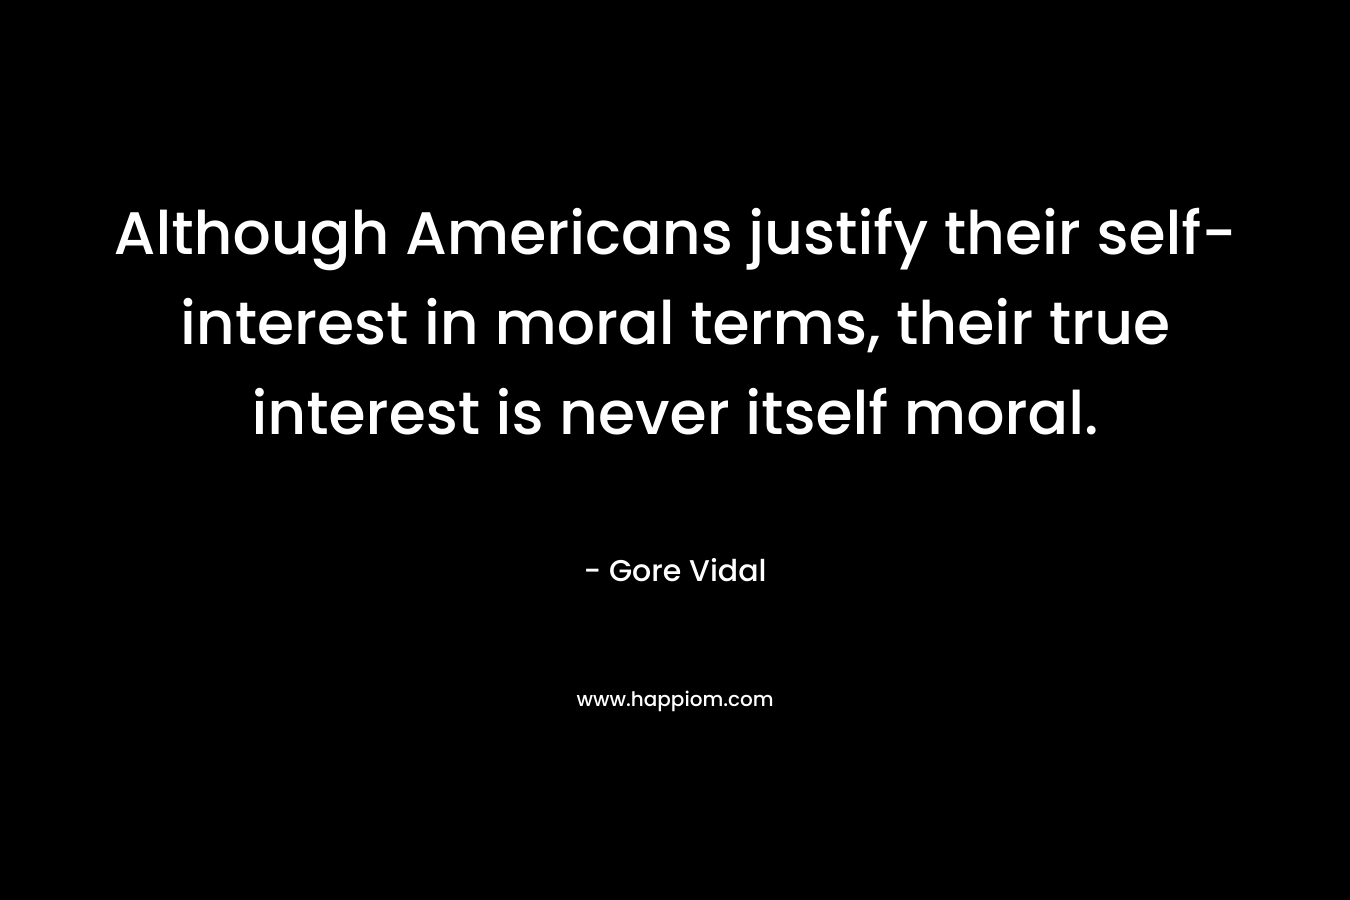 Although Americans justify their self-interest in moral terms, their true interest is never itself moral. – Gore Vidal